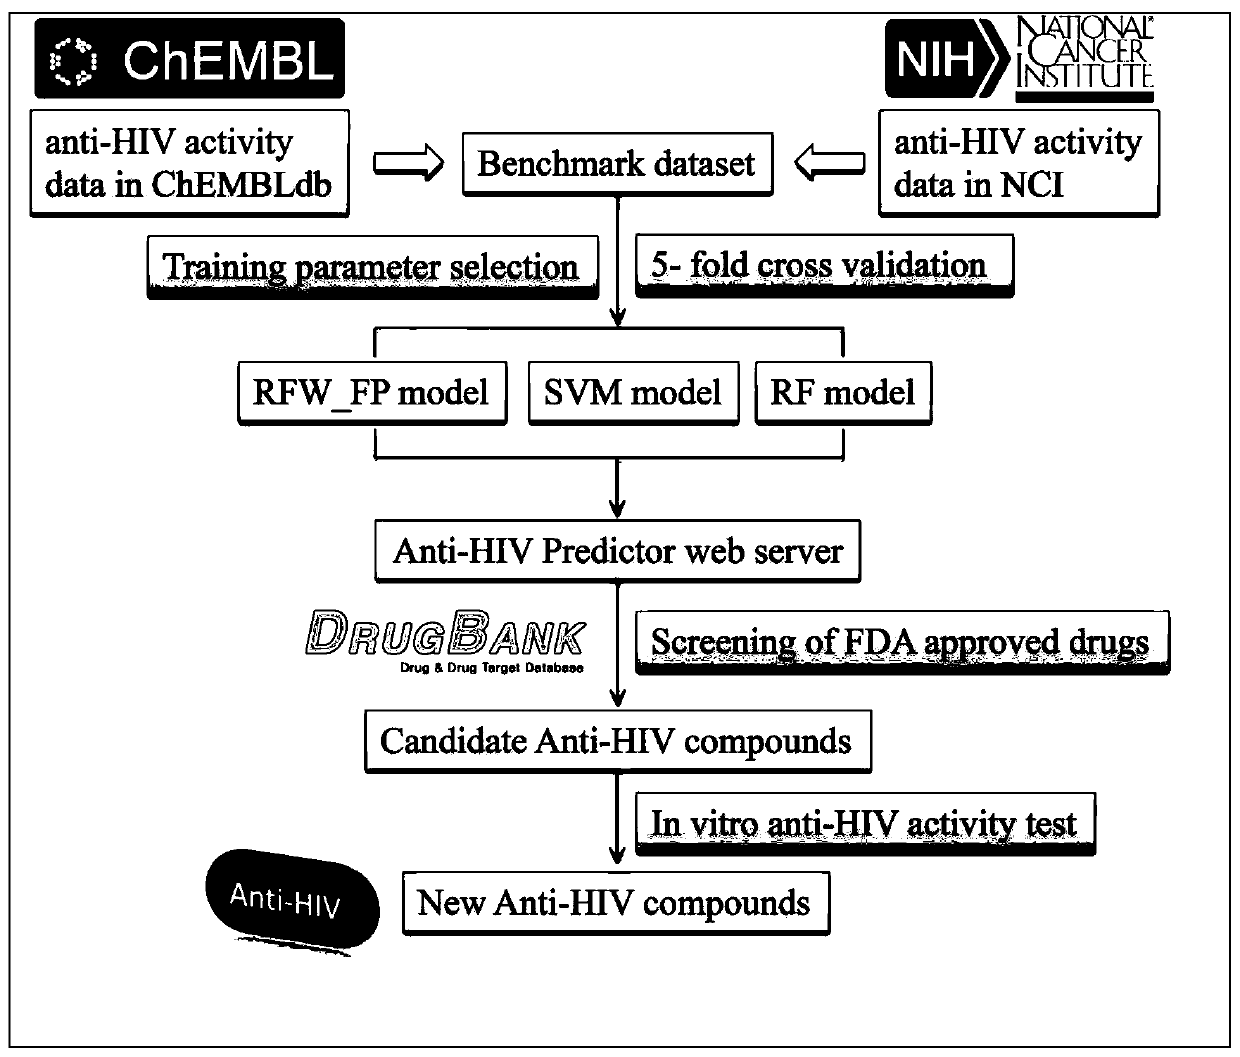 Application of Cetrorelix in the Preparation of Drugs for Treating AIDS